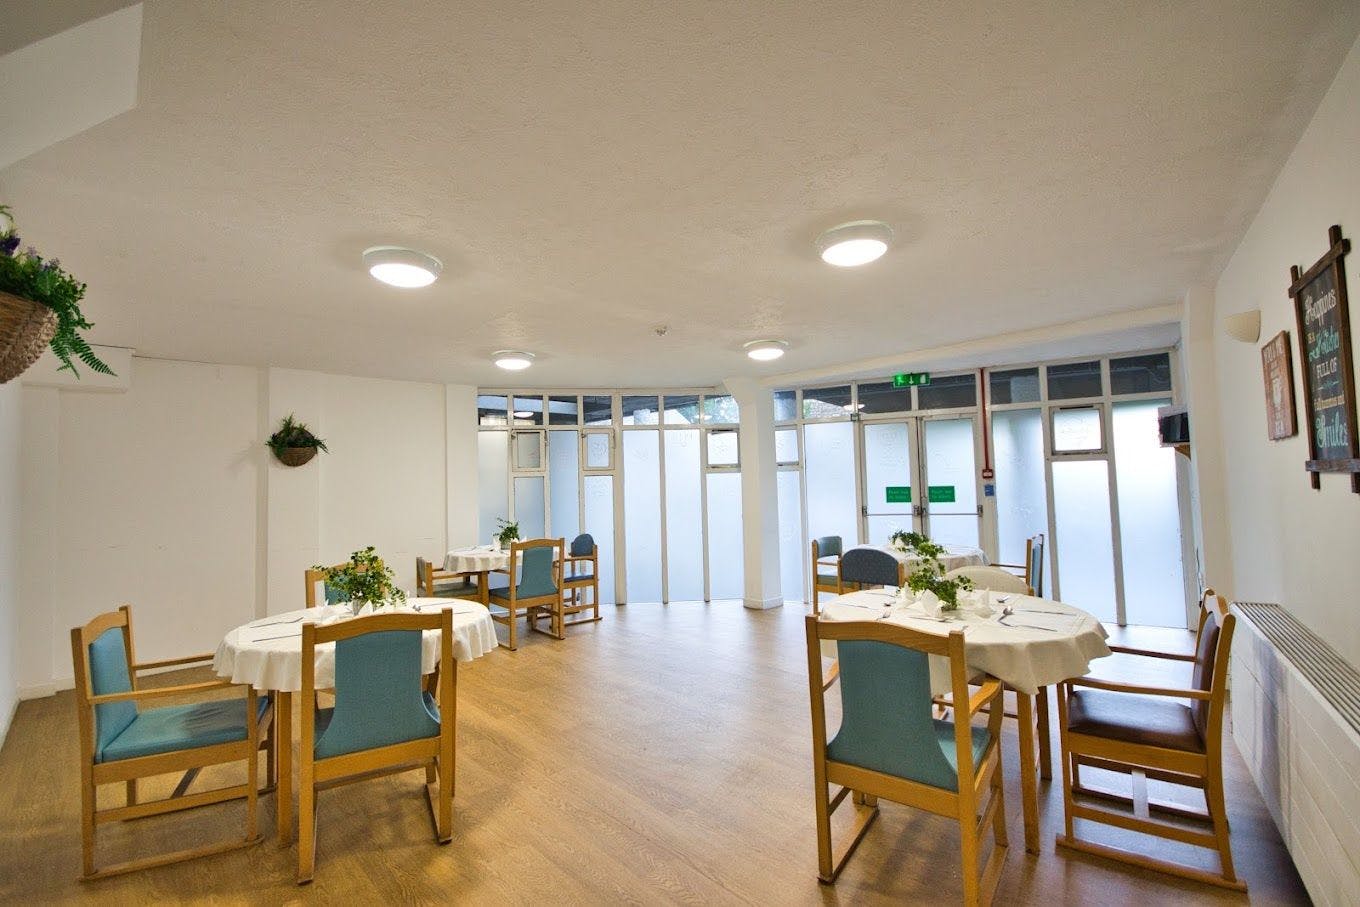 Dining Room at Elburton Heights Care Home in Plymouth, Devon